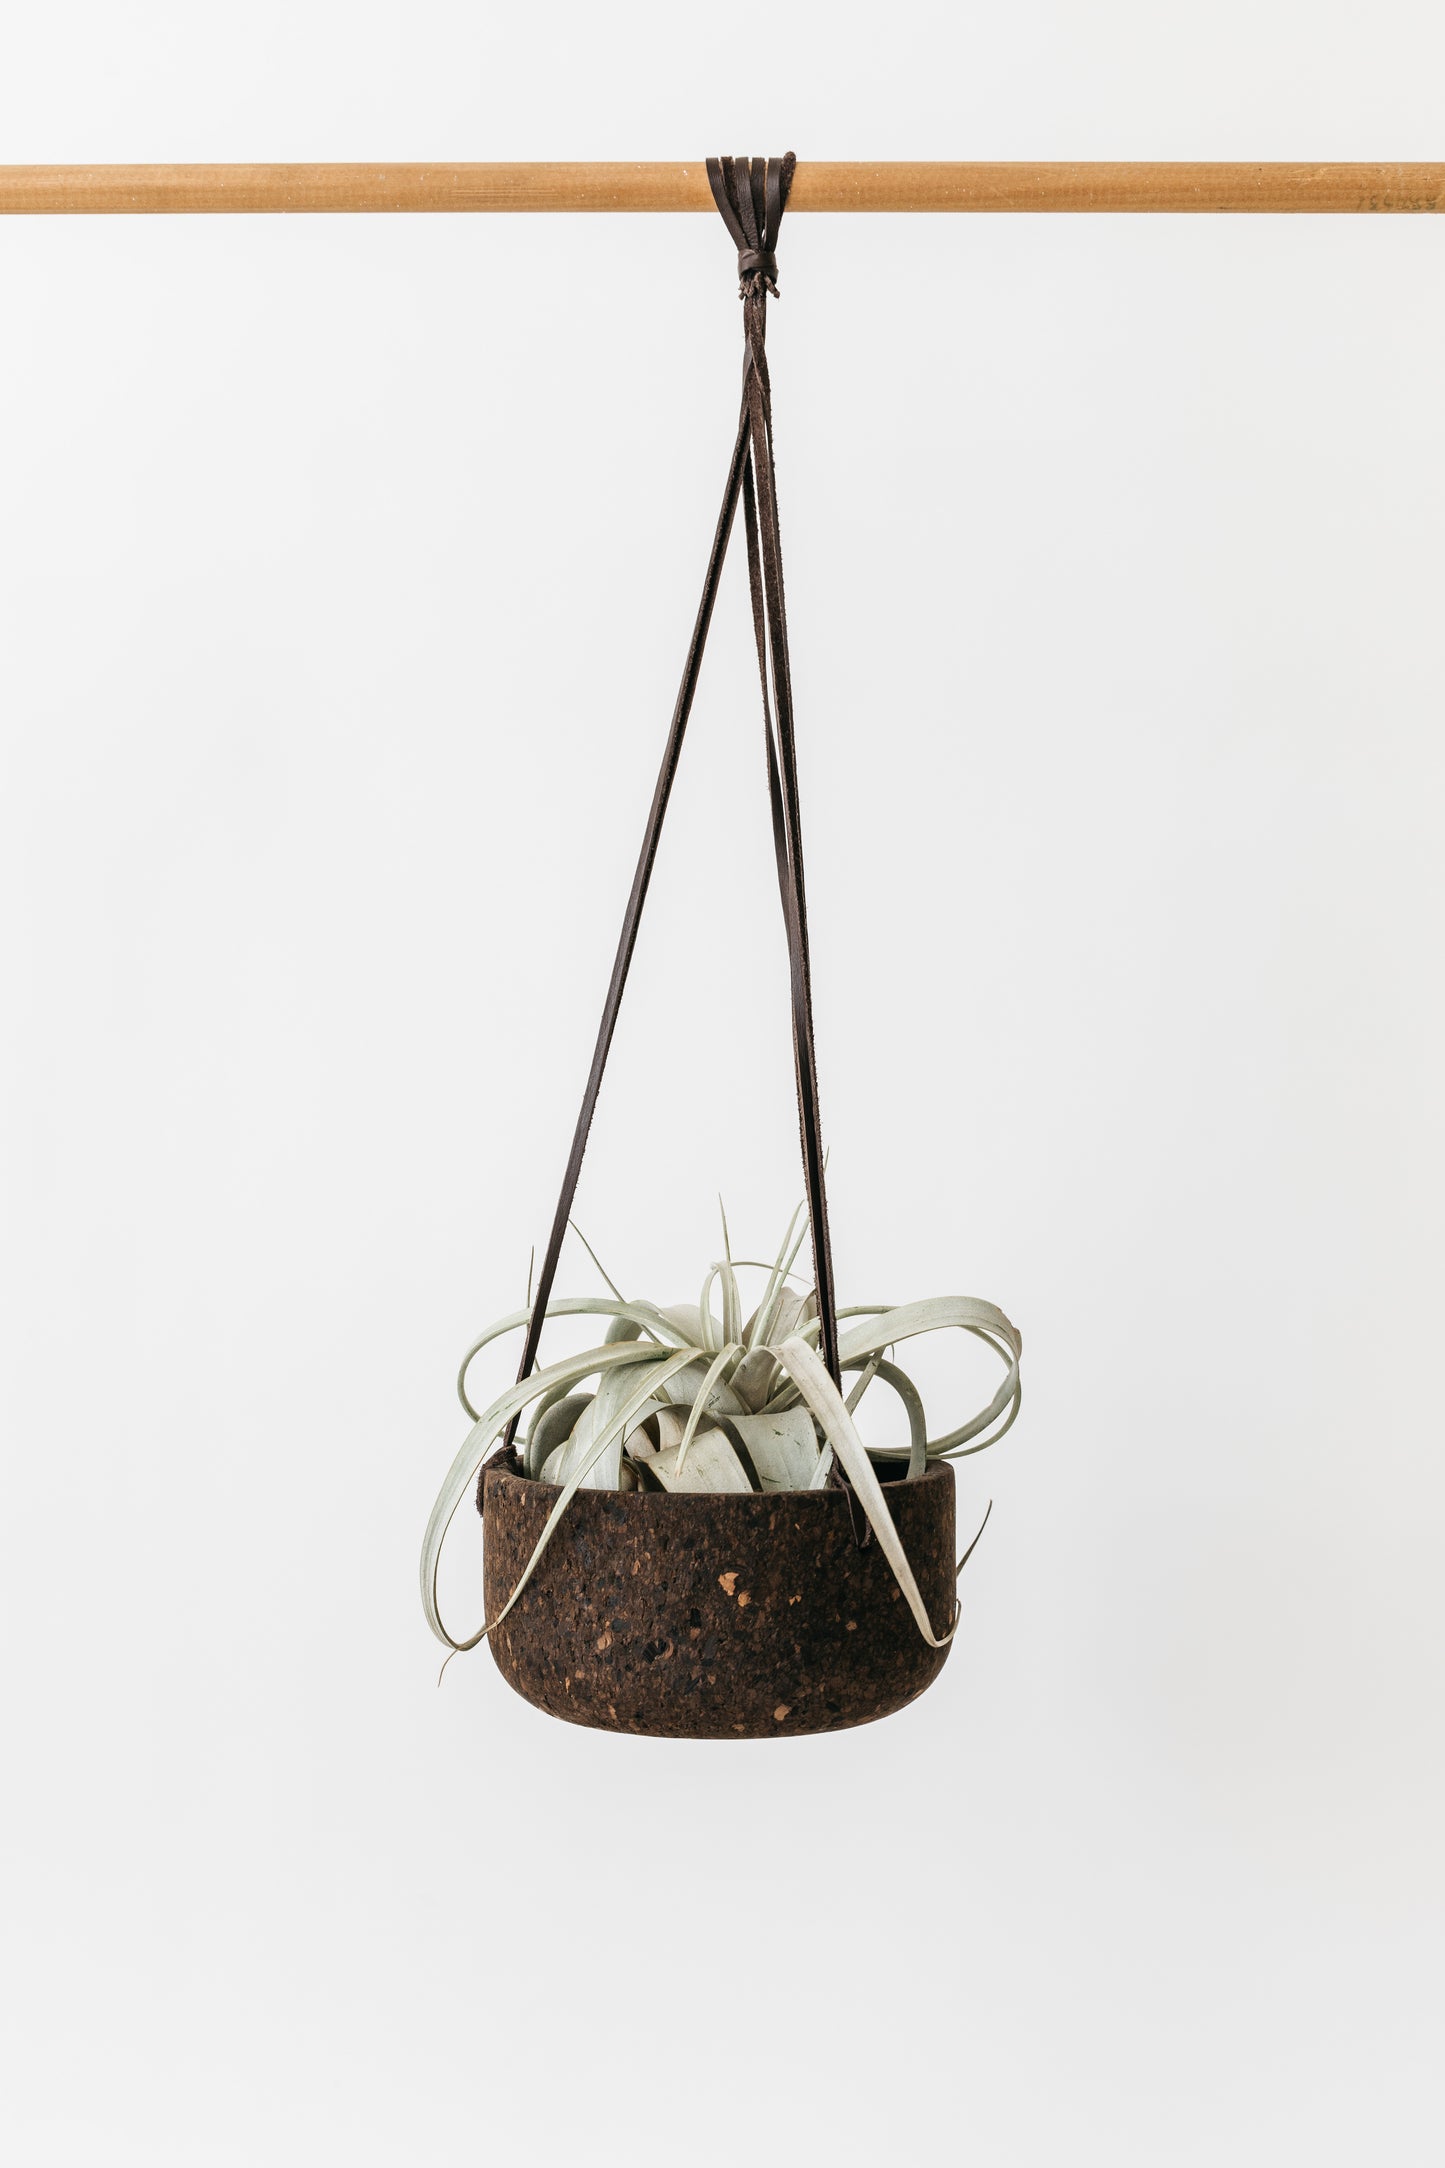 Hanging charcoal cork planter. Hand-turned with a dark brown leather lace. Shown with an air plant inside. By Melanie Abrantes Designs.